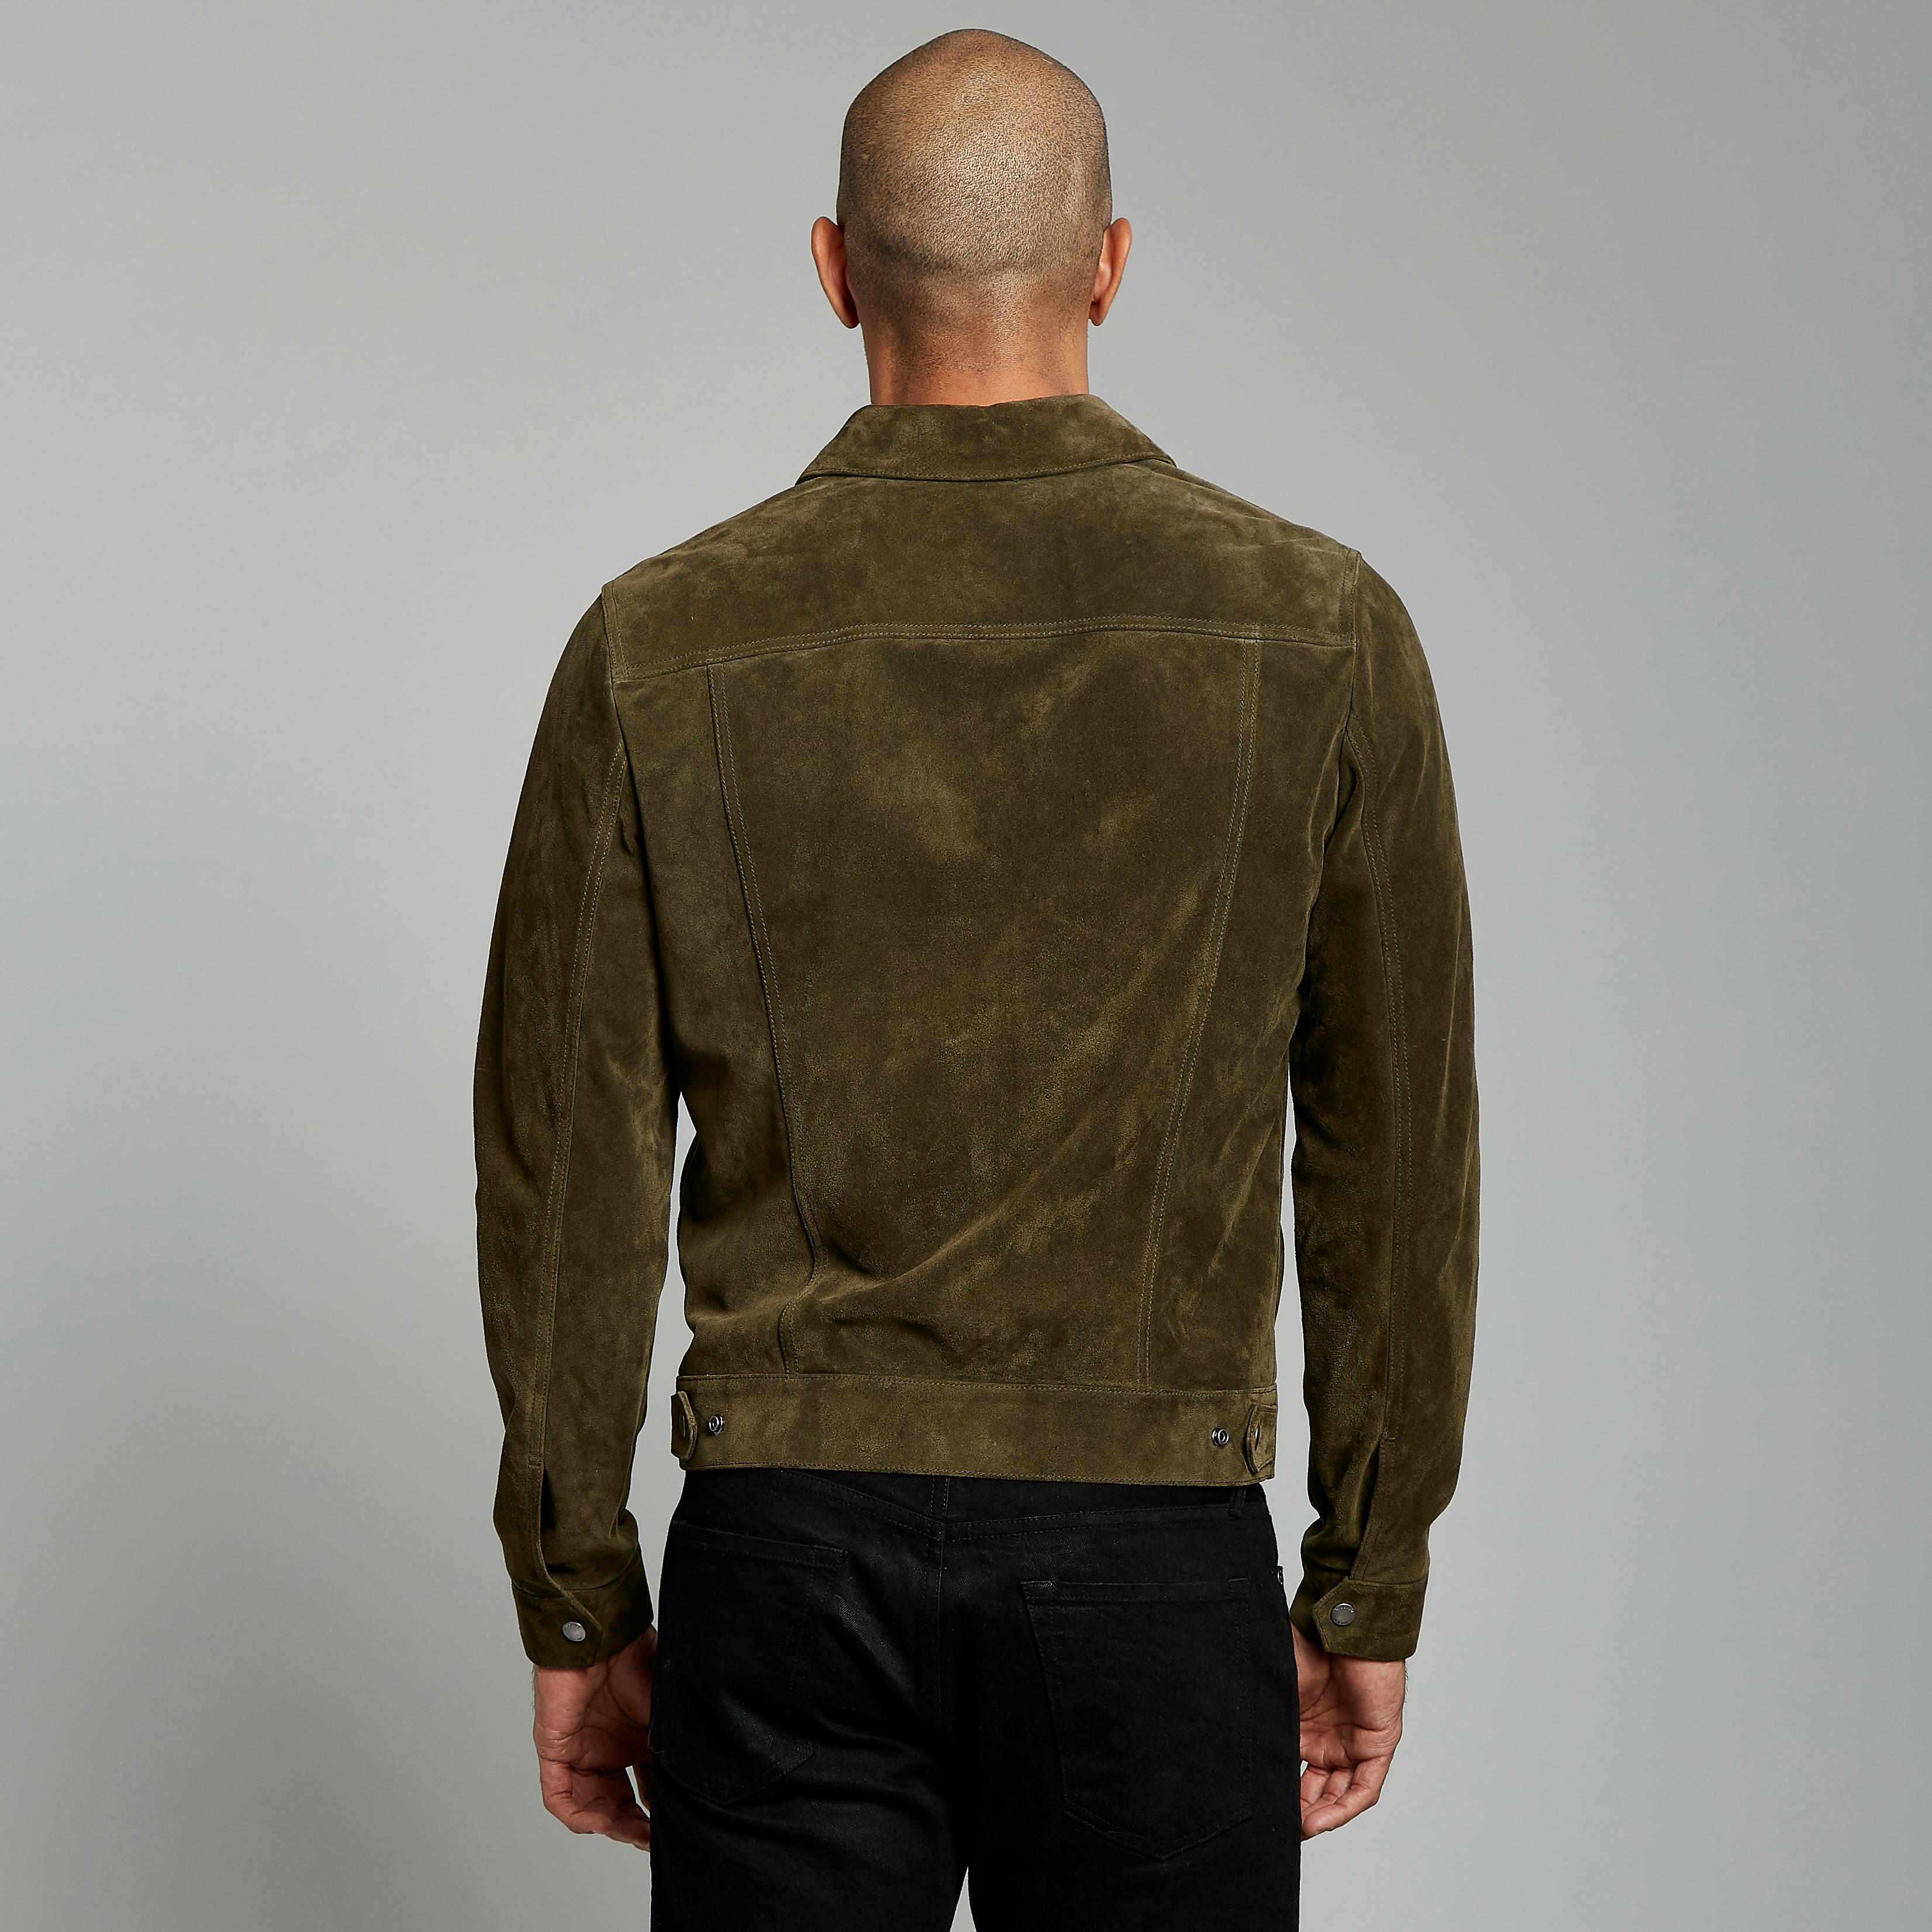 Todd Snyder Dylan Waxed Cotton Jacket: Reviewed and Tested – Robb Report